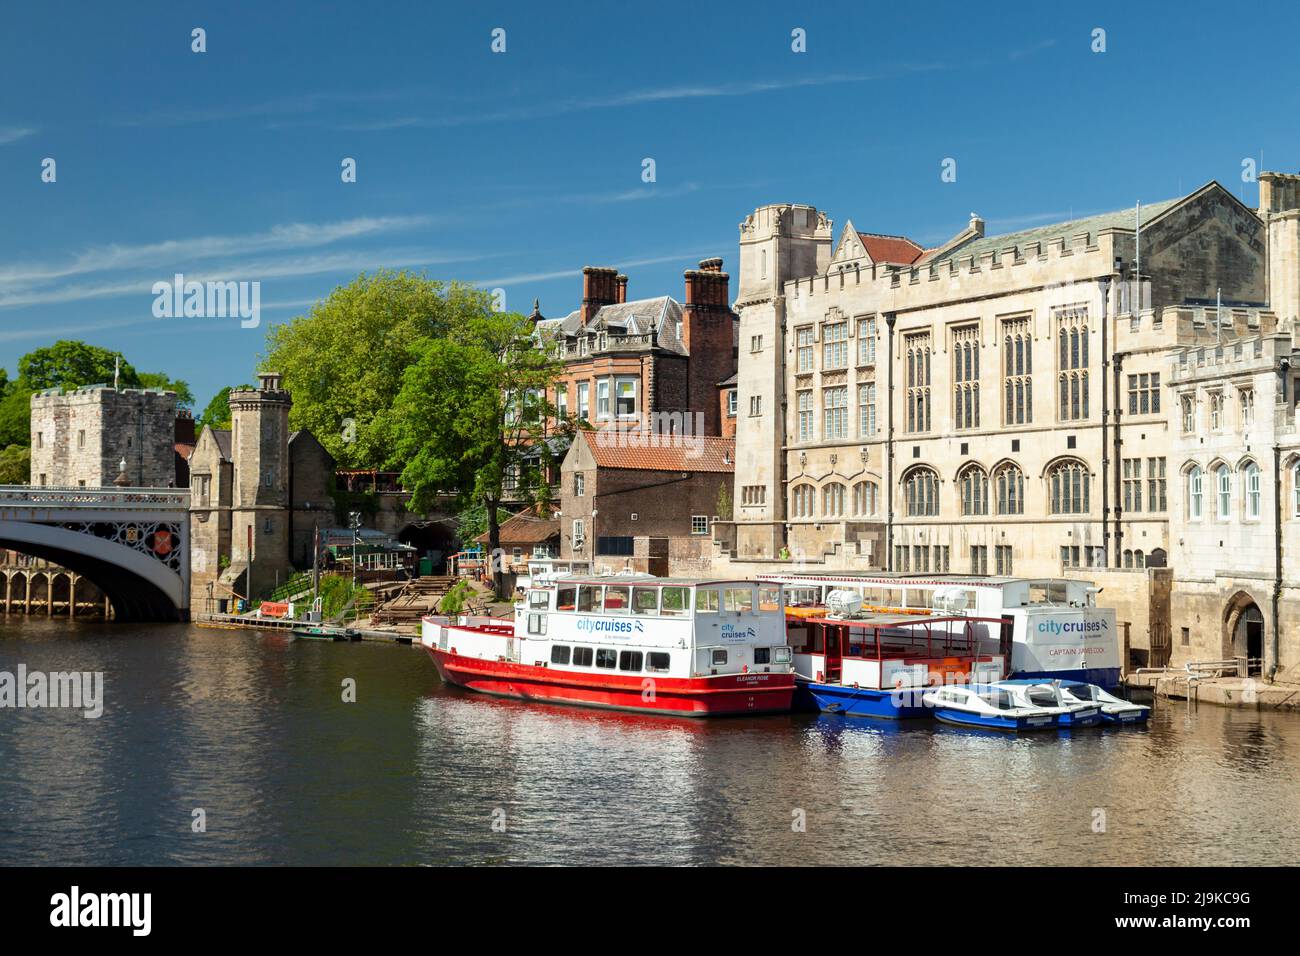 Boote auf dem Fluss Ouse in York, England. Stockfoto